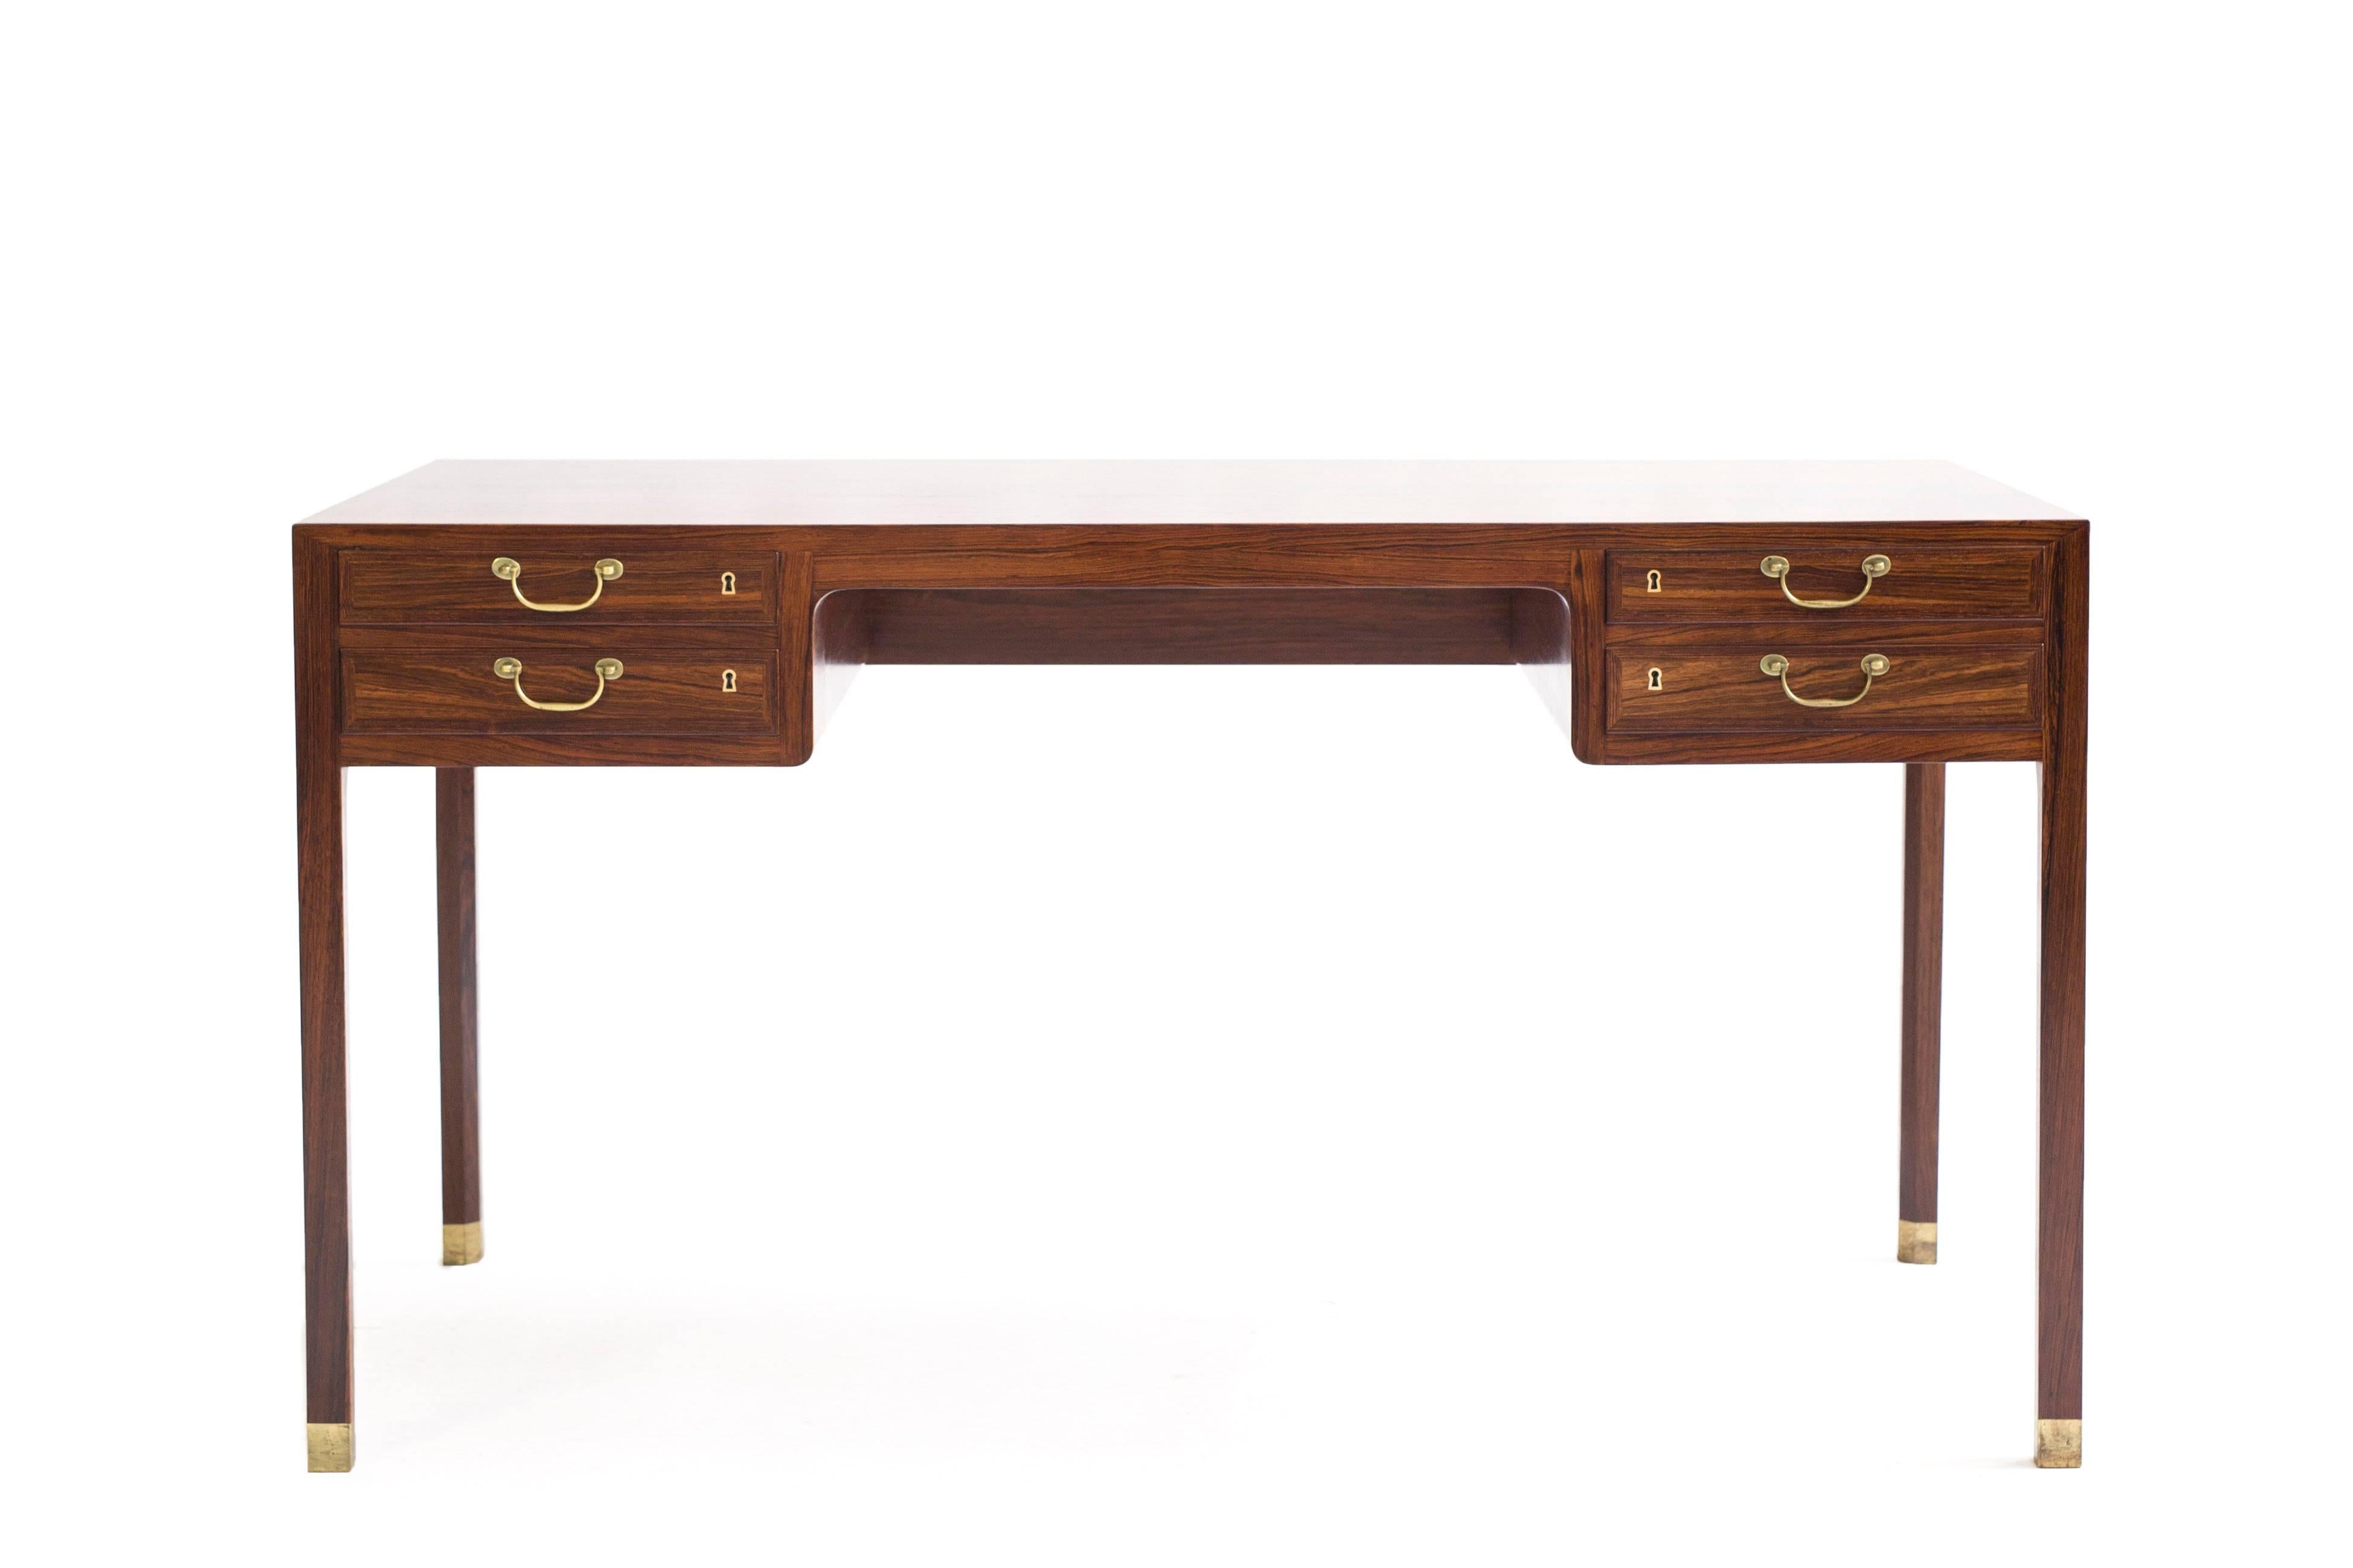 A freestanding Ole Wanscher Brazilian rosewood desk with shoes and handles of brass.

Executed by A. J. Iversen, Denmark.

Very fine condition.